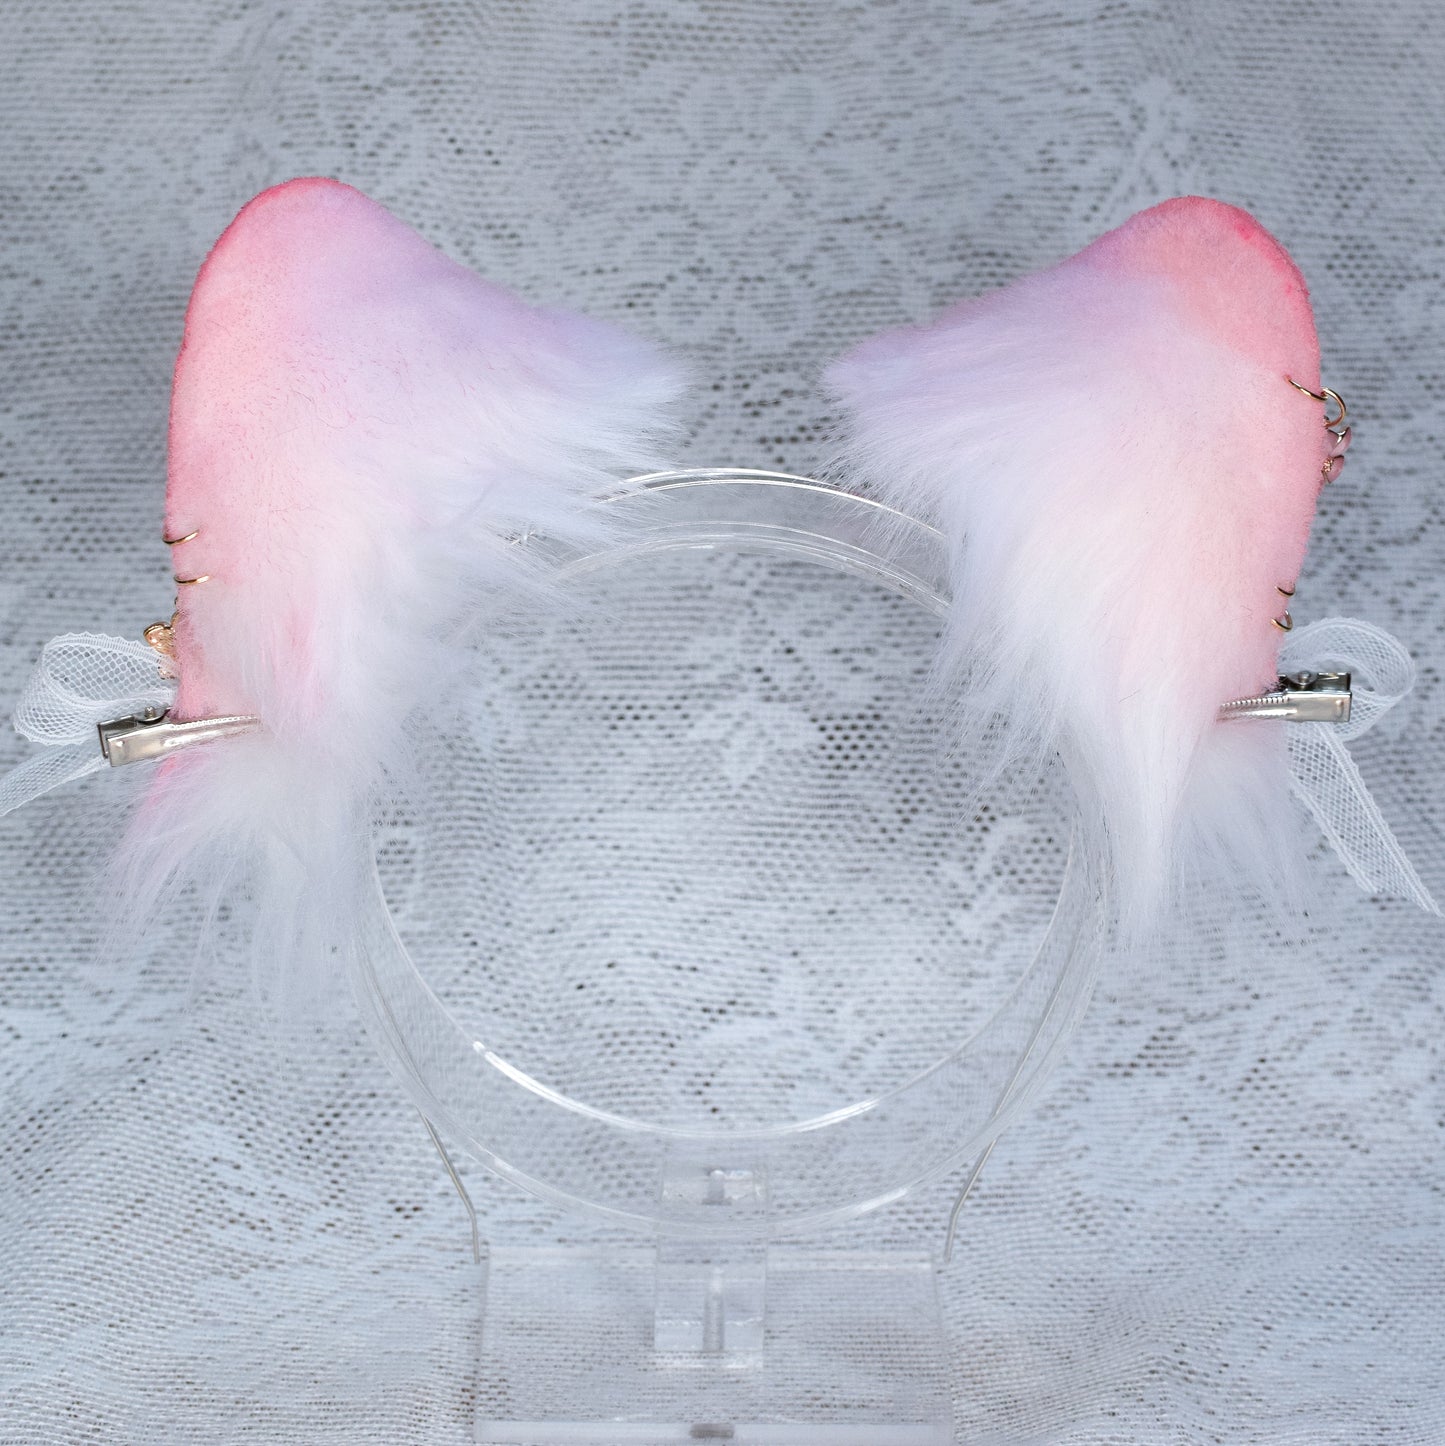 Kitsune Cosplay Ears in pink with charms